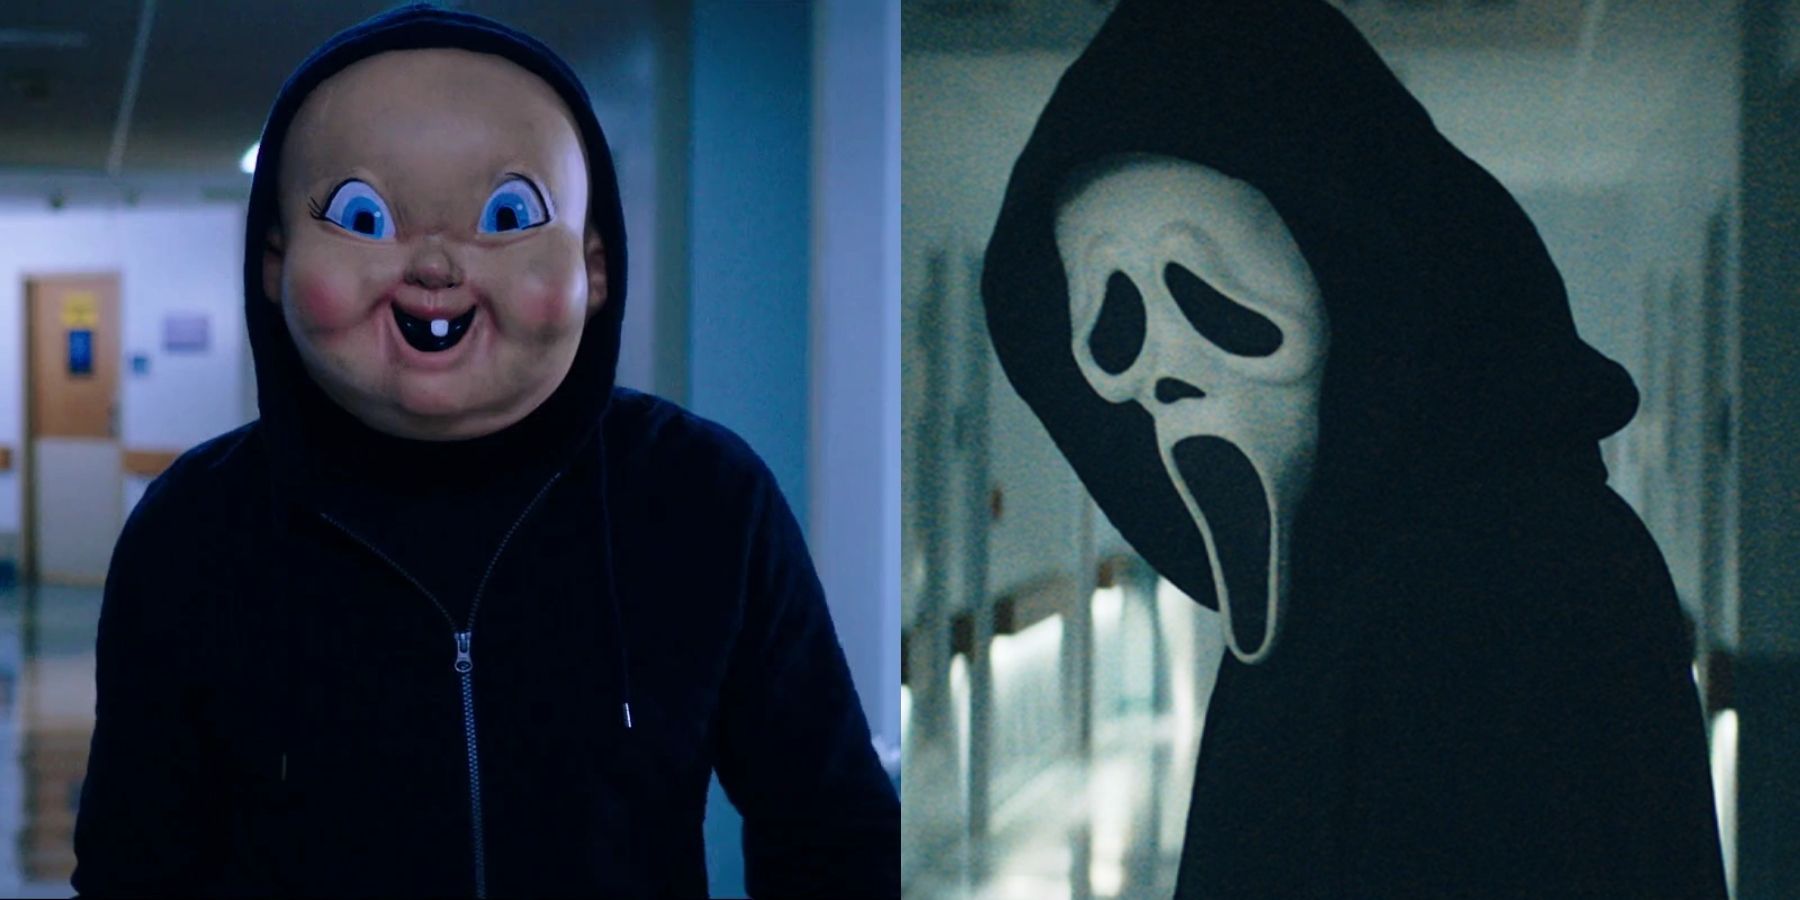 Split image of Babyface from Happy Death Day and Ghostface from Scream